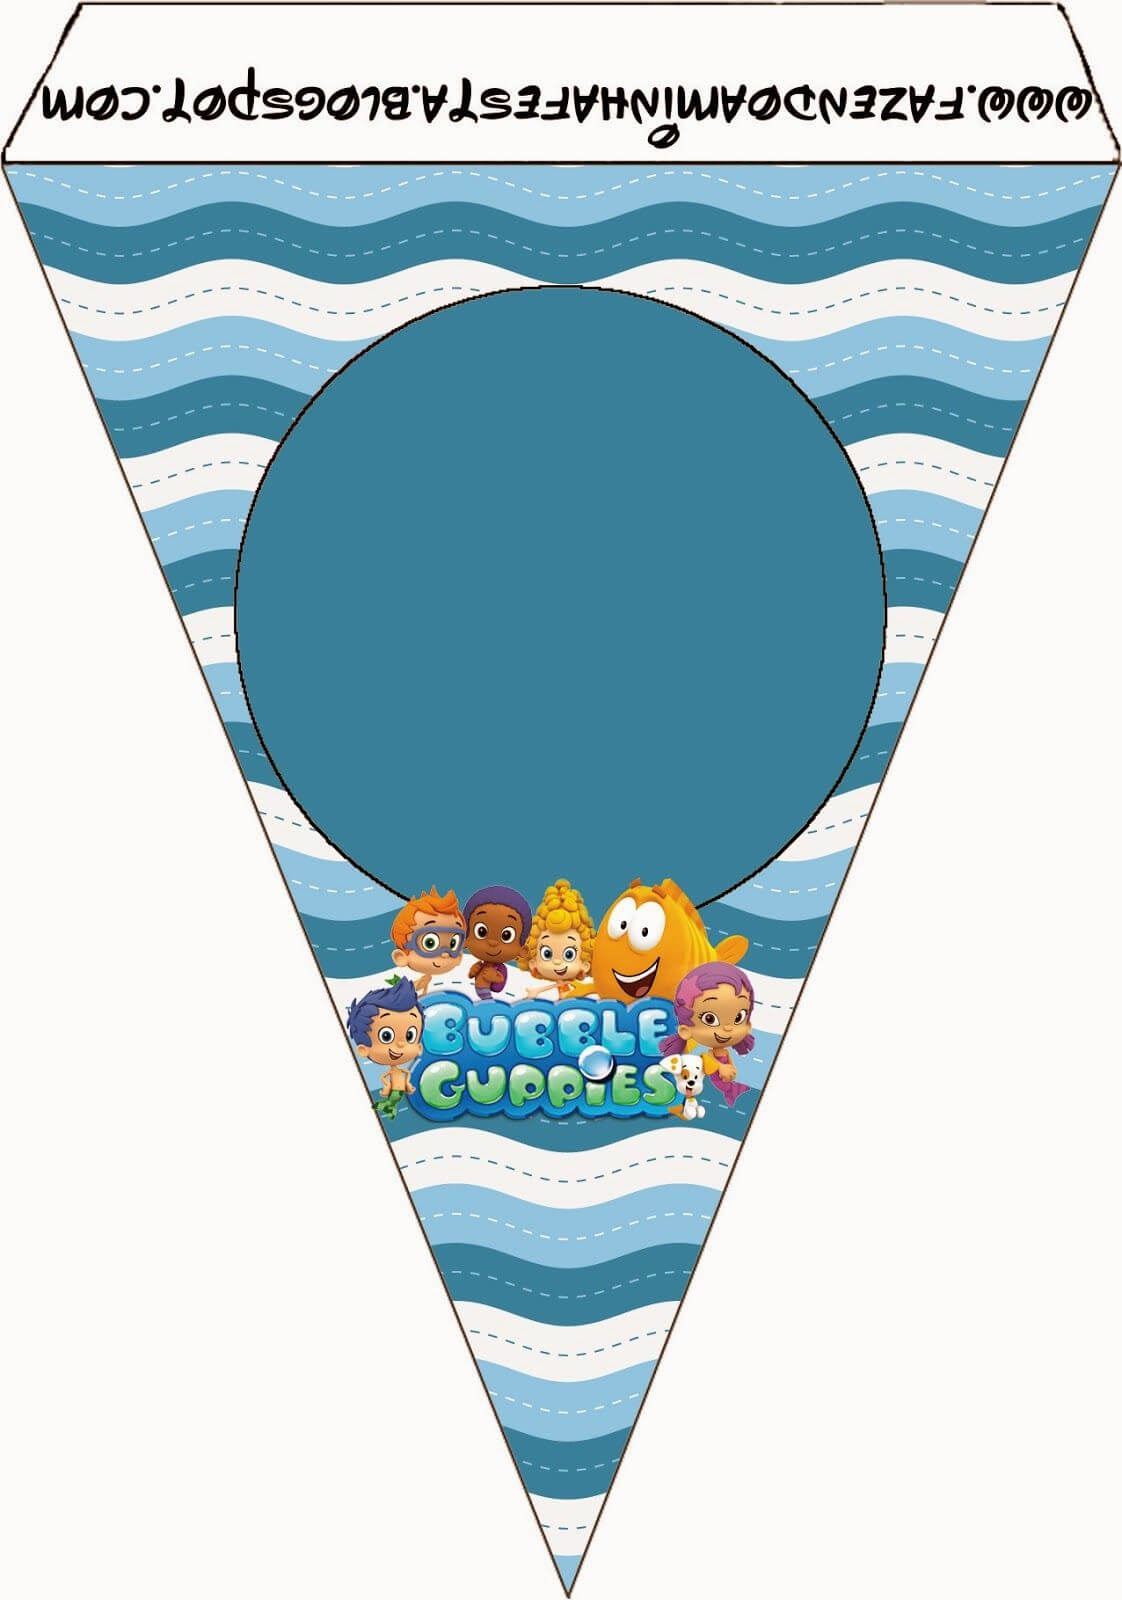 Bubble Guppies Free Party Printables. | Bubble Guppies Pertaining To Bubble Guppies Birthday Banner Template